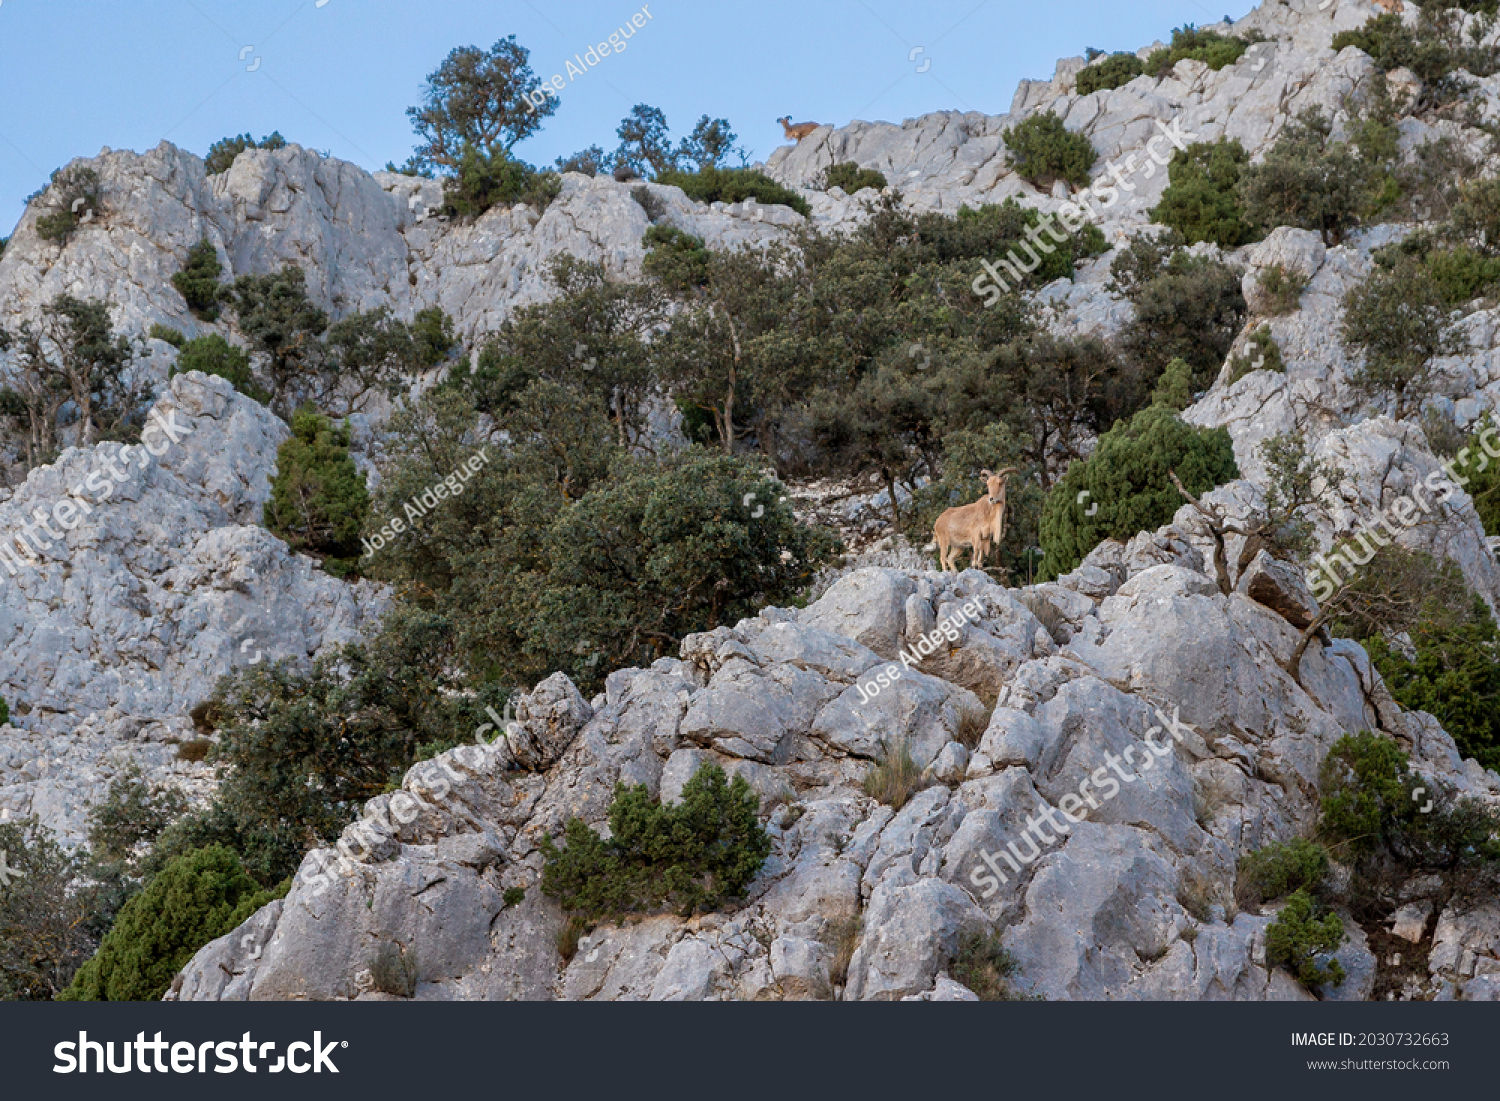 Mountain goats, arruis, in Sierra Espuña. Sierra Espuña is a mountainous massif with a dense forest mainly of pine trees, with an abundant flora and fauna located in the Region of Murcia, Spain #2030732663